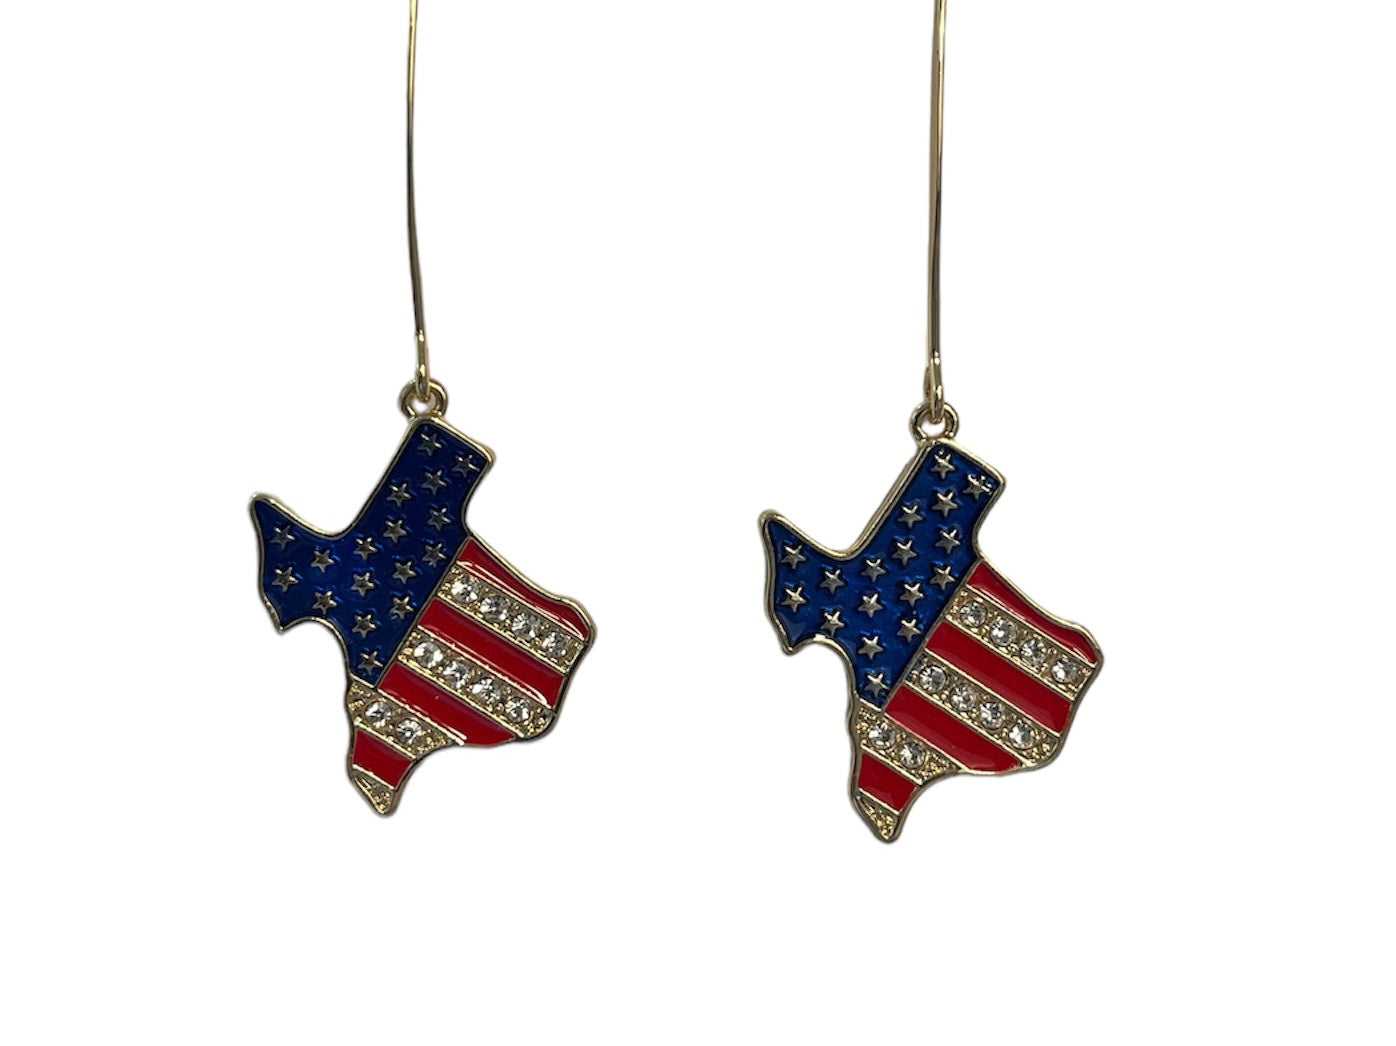 Red, White and Blue Texas Earrings